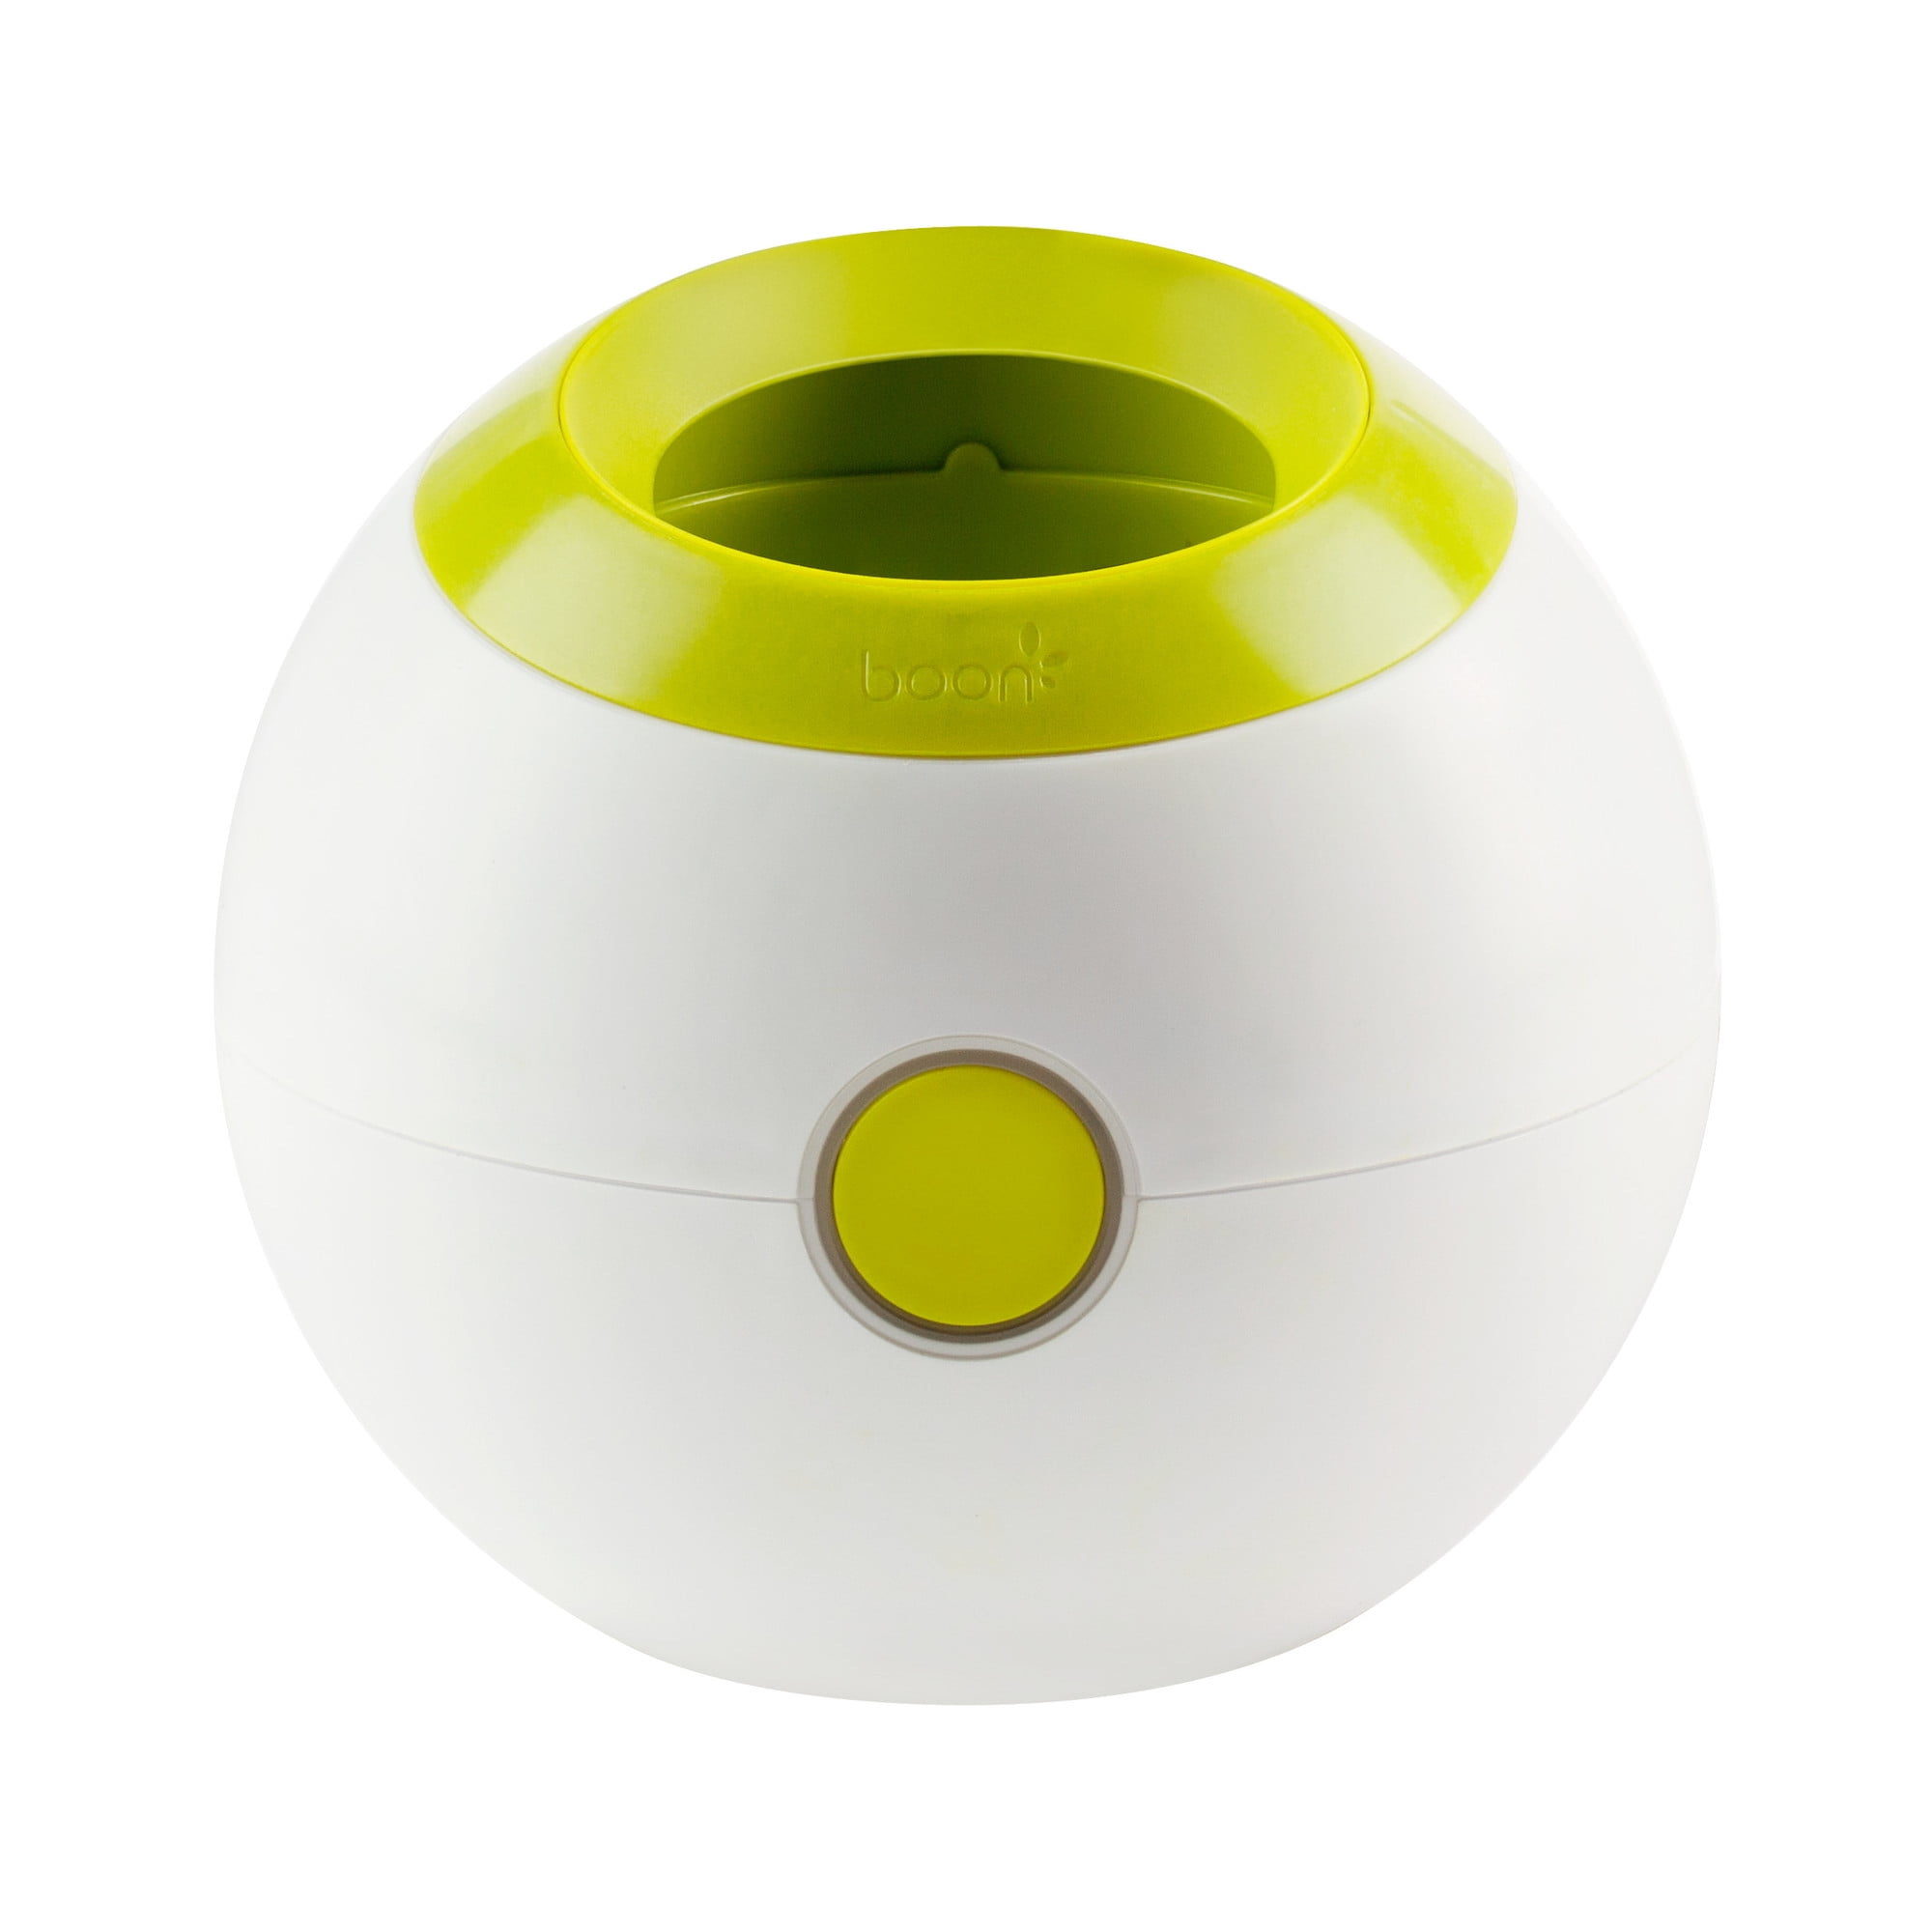 Boon Orb Bottle Warmer Fits Most Baby Bottles, Baby Bottle & Baby Food Warmer, Green + White - image 1 of 5